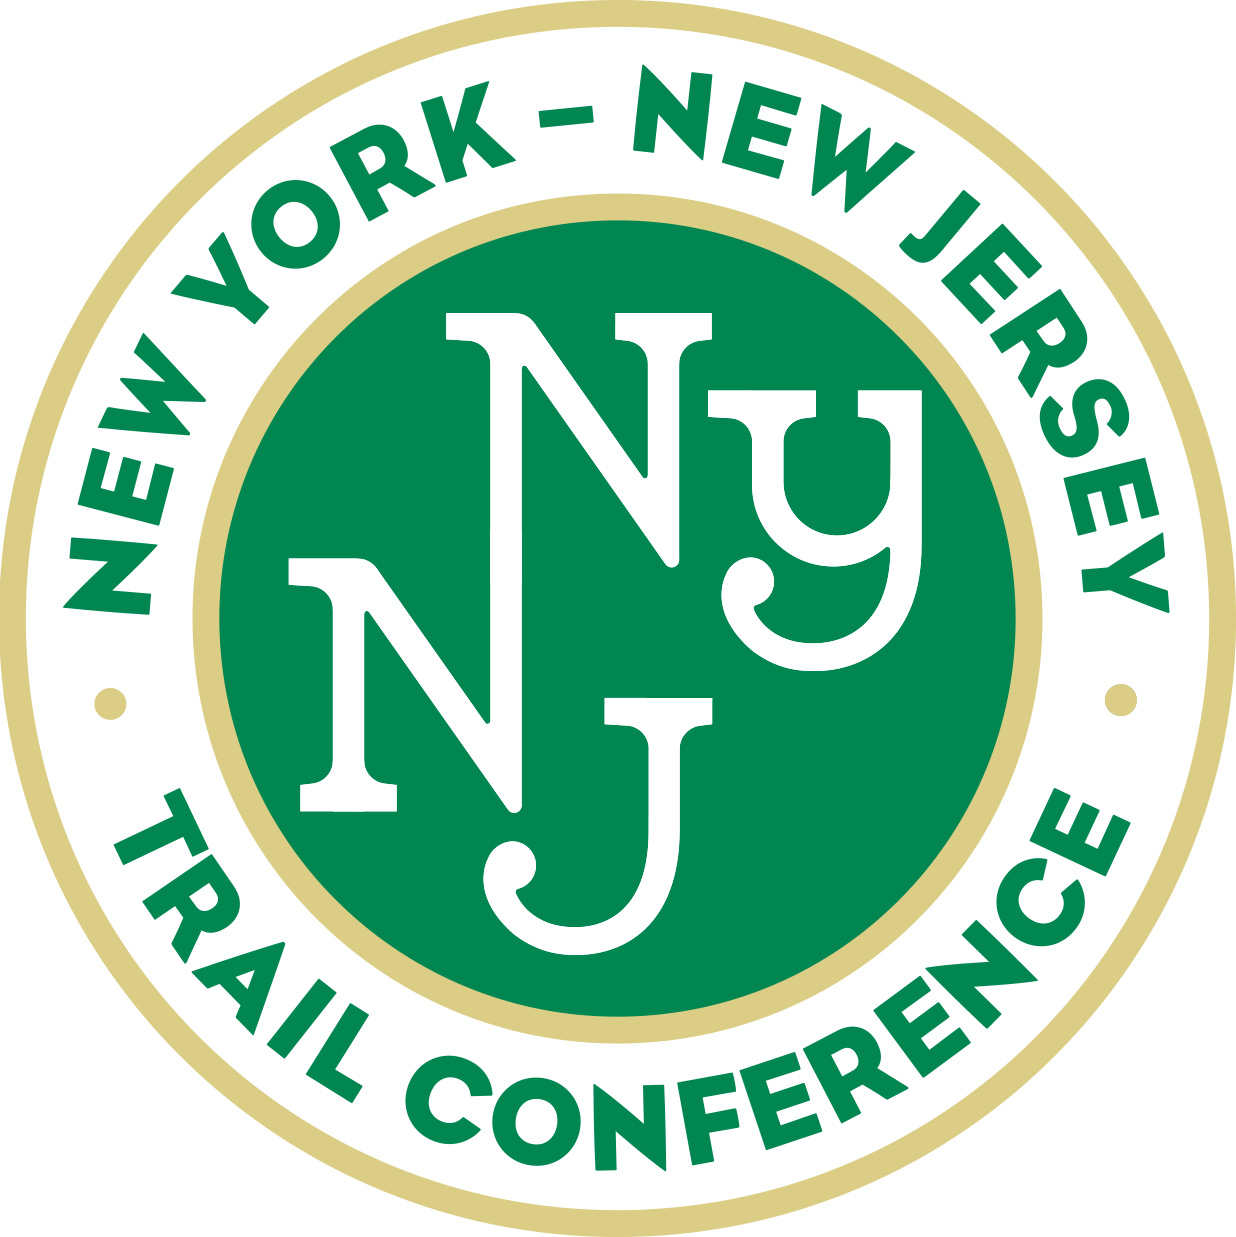 New York - New Jersey Trail Conference logo